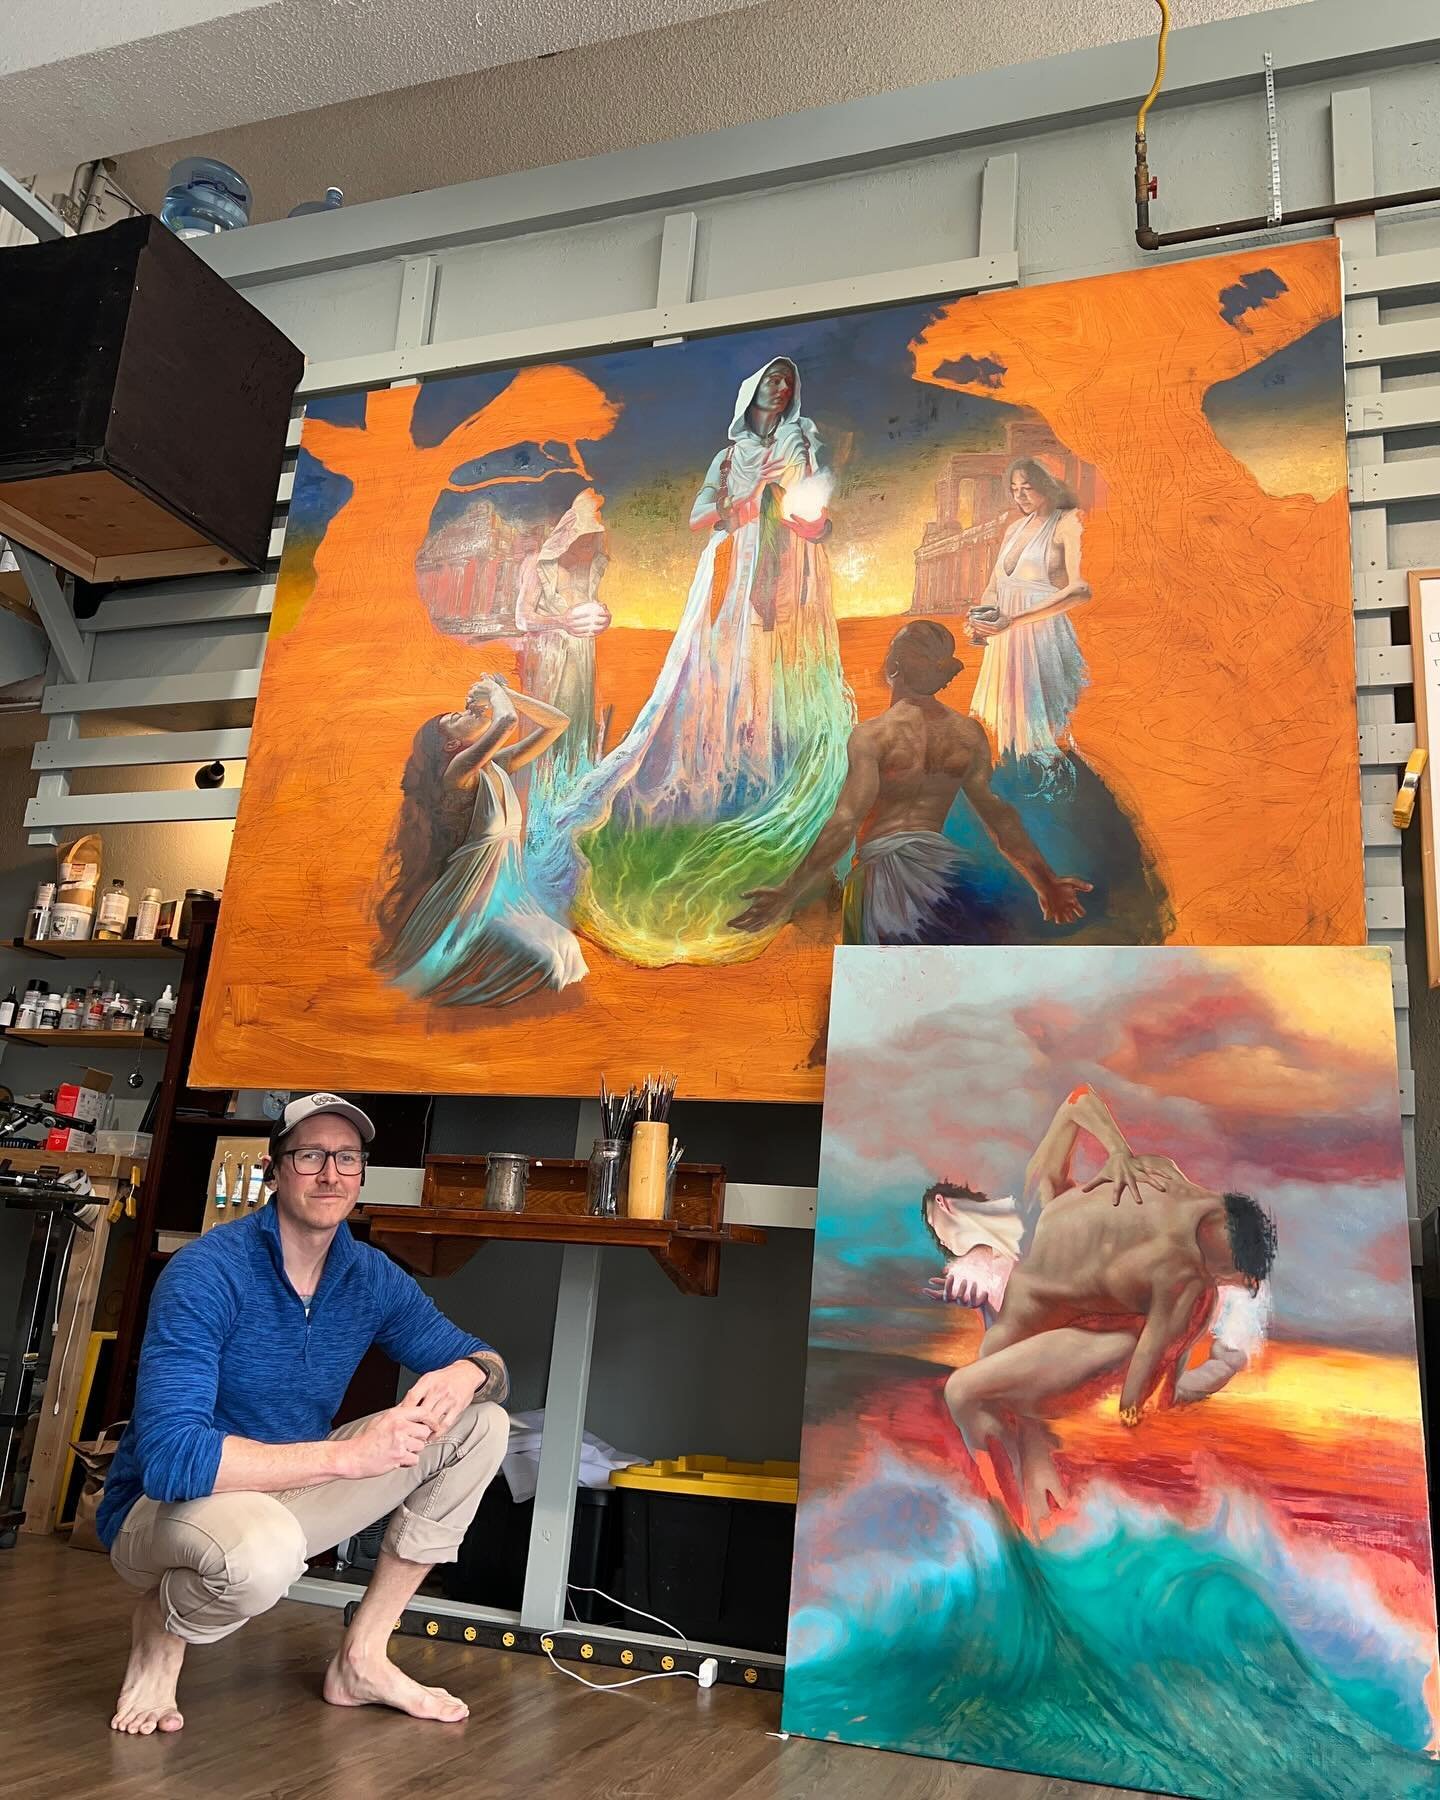 Big things are happening in the studio as spring fully settles in here in Bellingham. Feels just right to be switching off between working on this giant piece that has been brewing in my mind for months and this awesome commission project for a very 